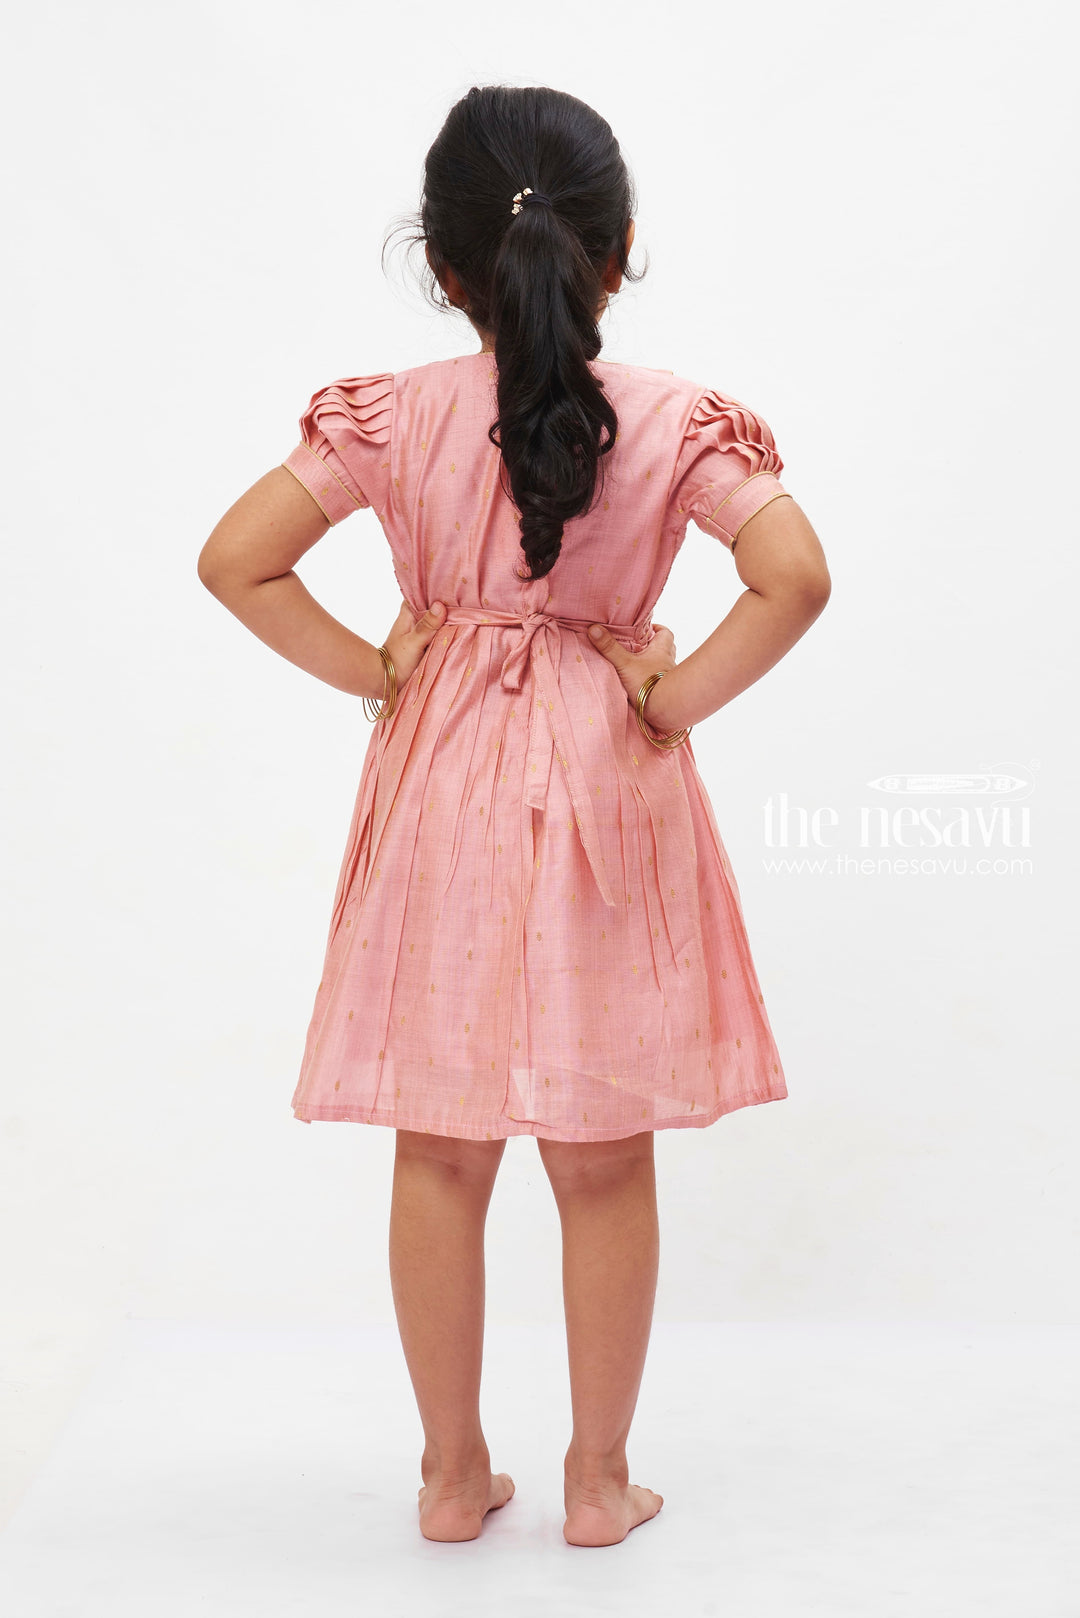 The Nesavu Girls Cotton Frock Blush Gold Elegance Frock: Traditional Puff Sleeve Dress for Girls Nesavu Traditional Blush Pink Girls Dress with Gold Accents | Puff Sleeve Formal Wear | The Nesavu